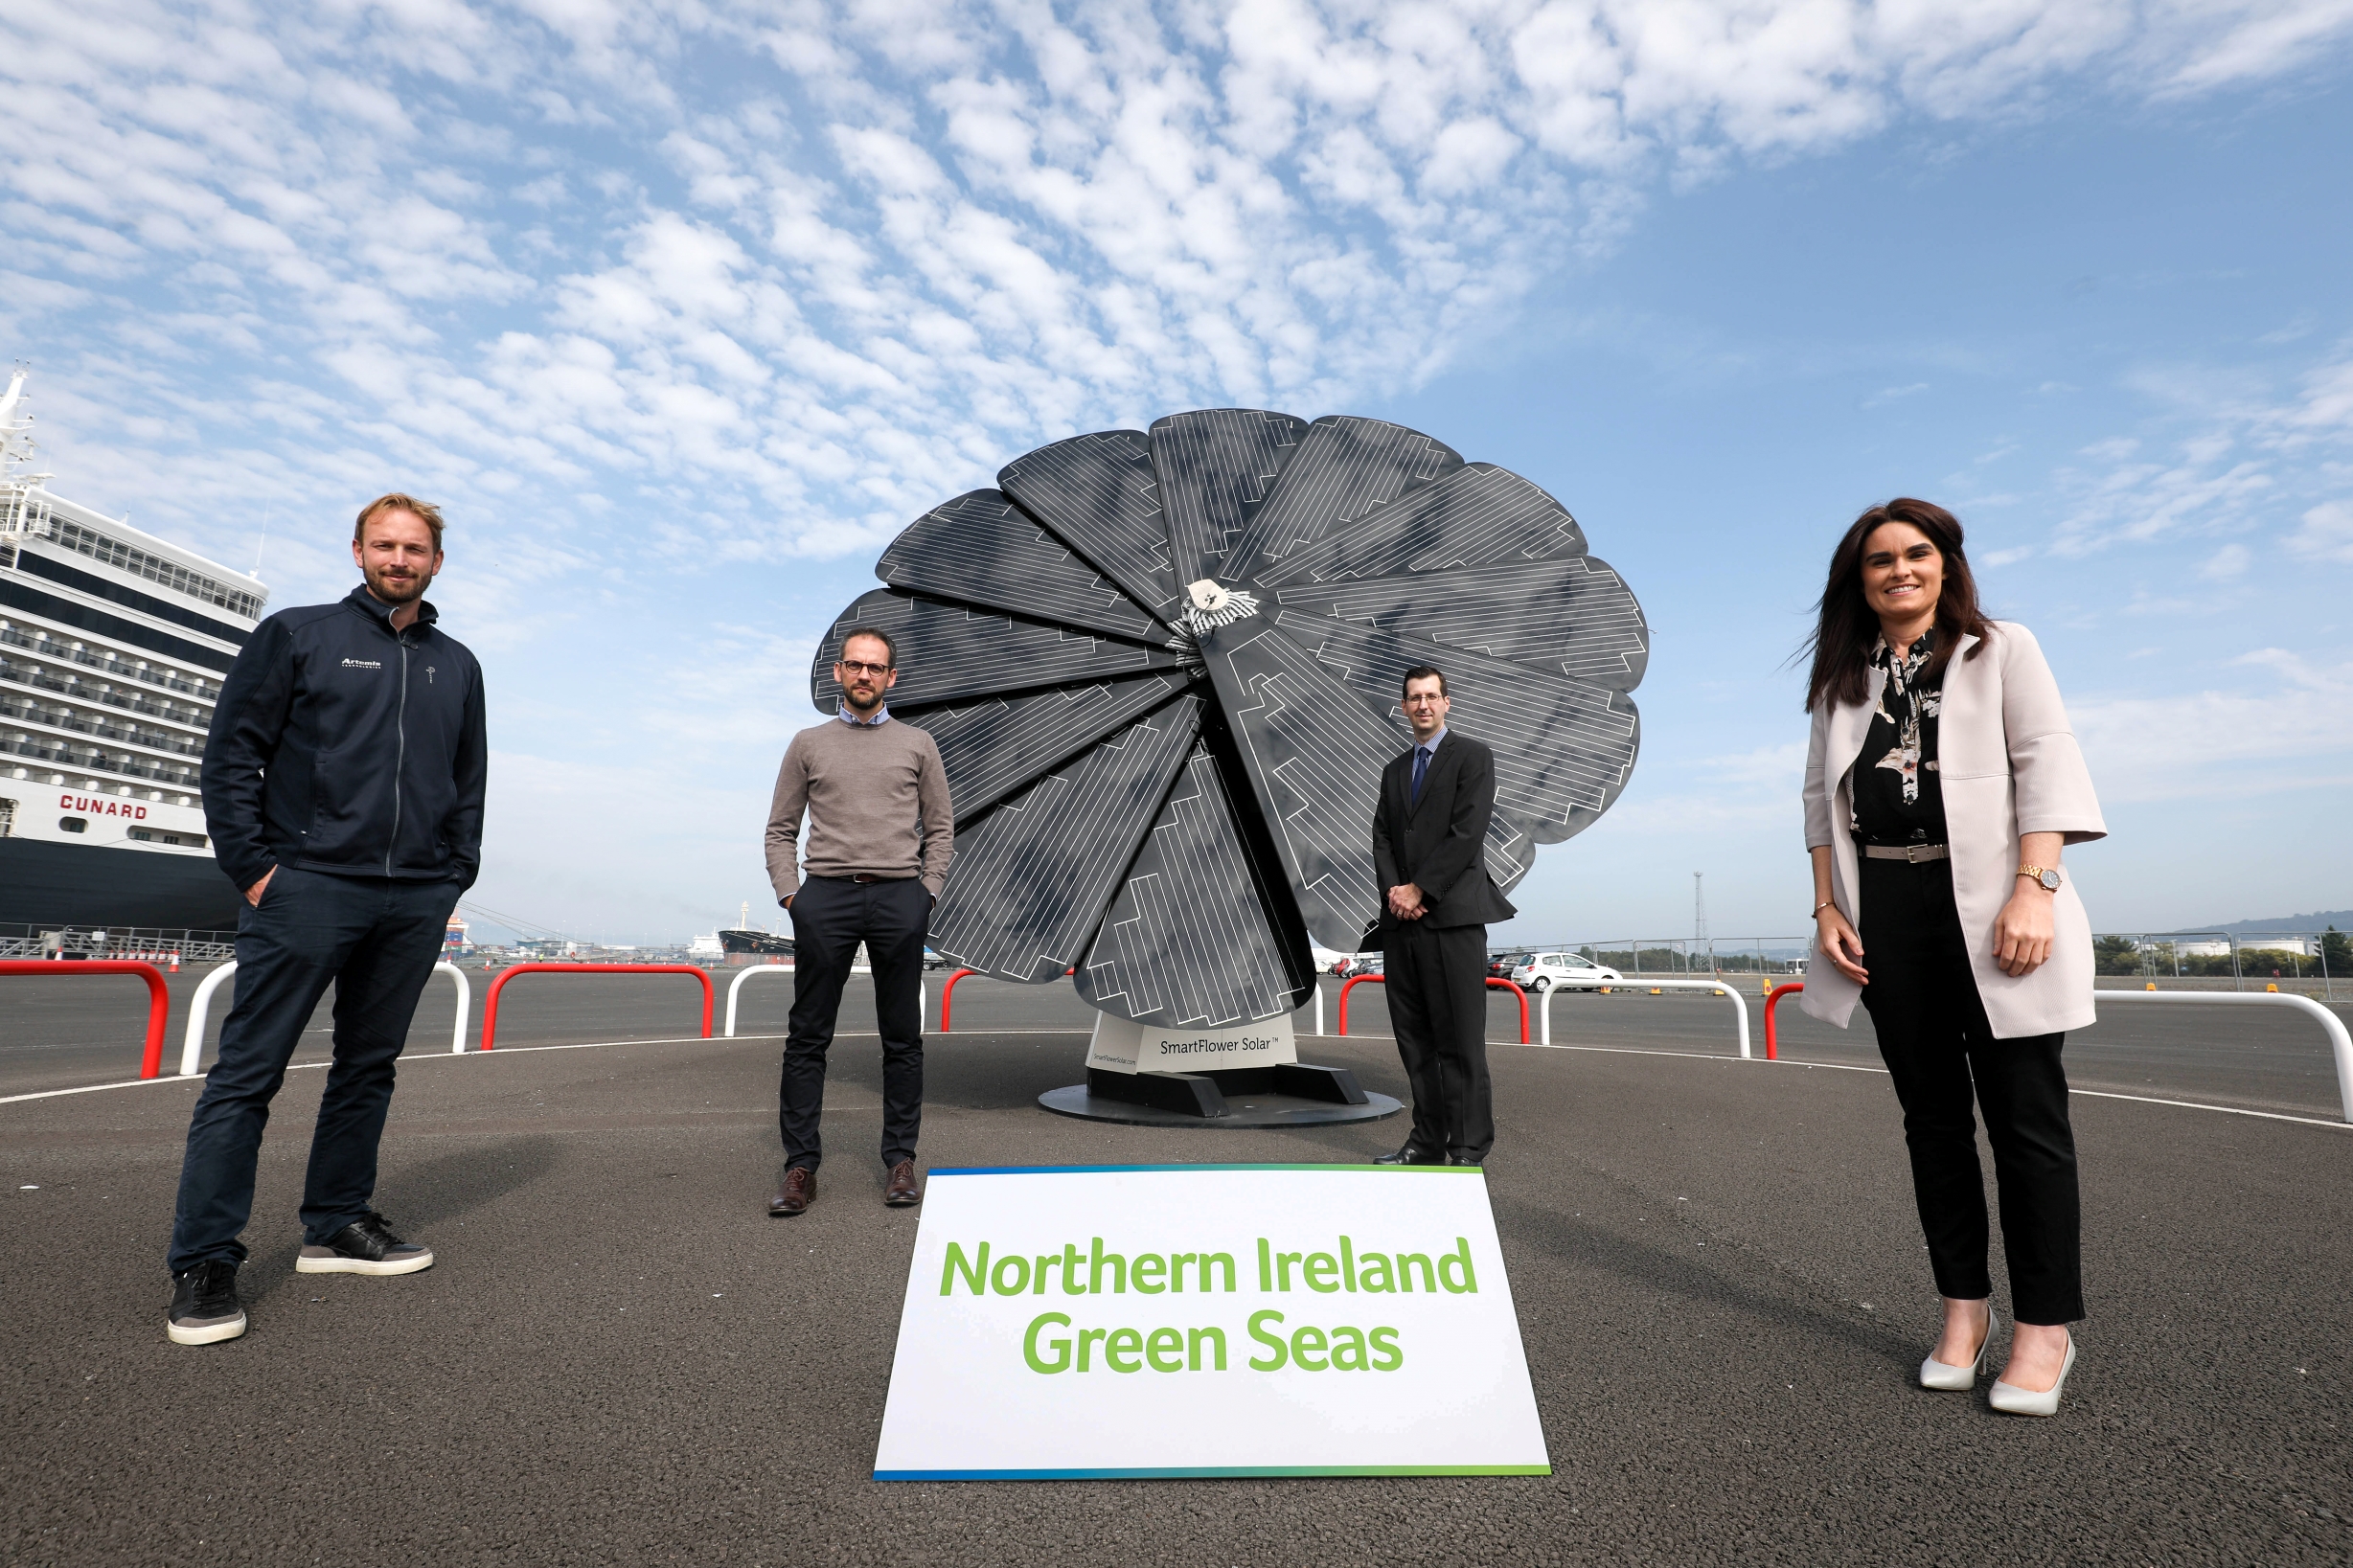 David Tyler, co founder of Artemis Technologies is pictured with three other recipients of the zero-emission maritime transport study funding